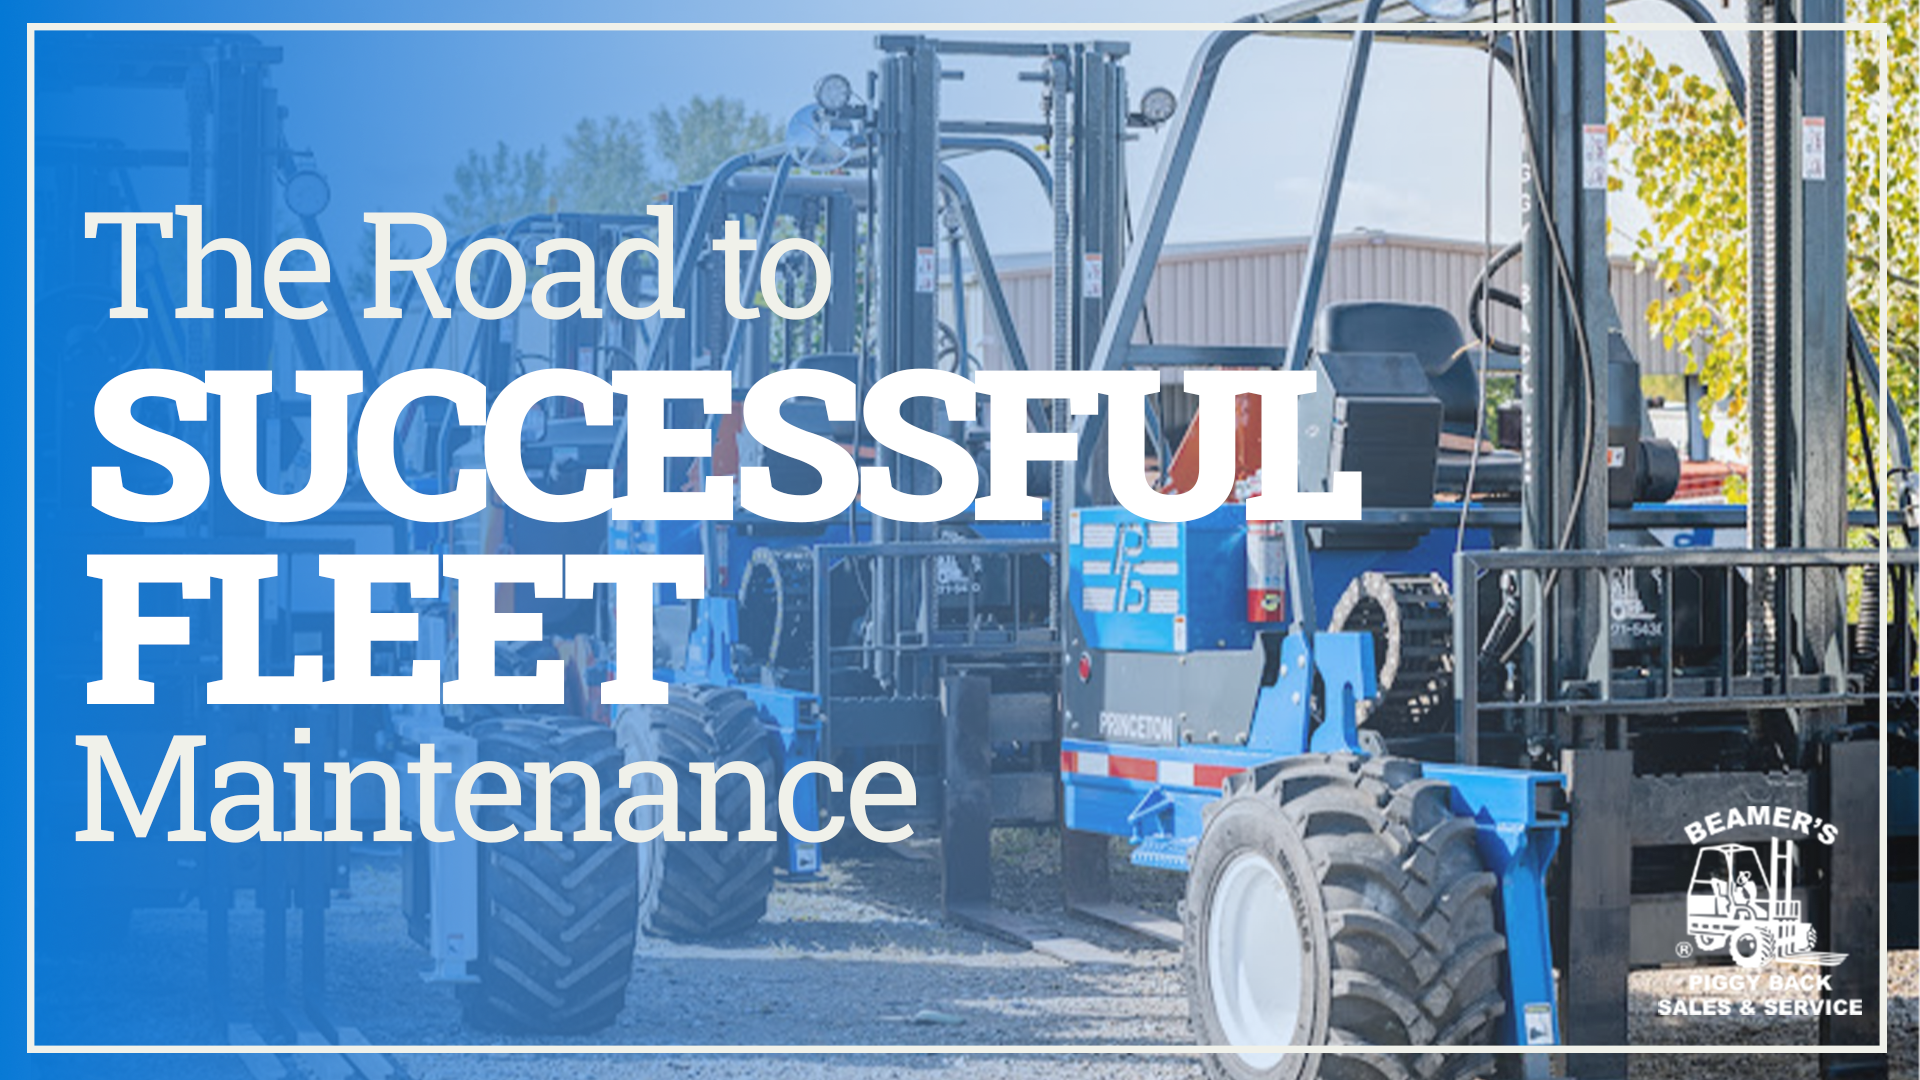 Blue forklifts. The text reads, "The Road to Successful Fleet Maintenance"